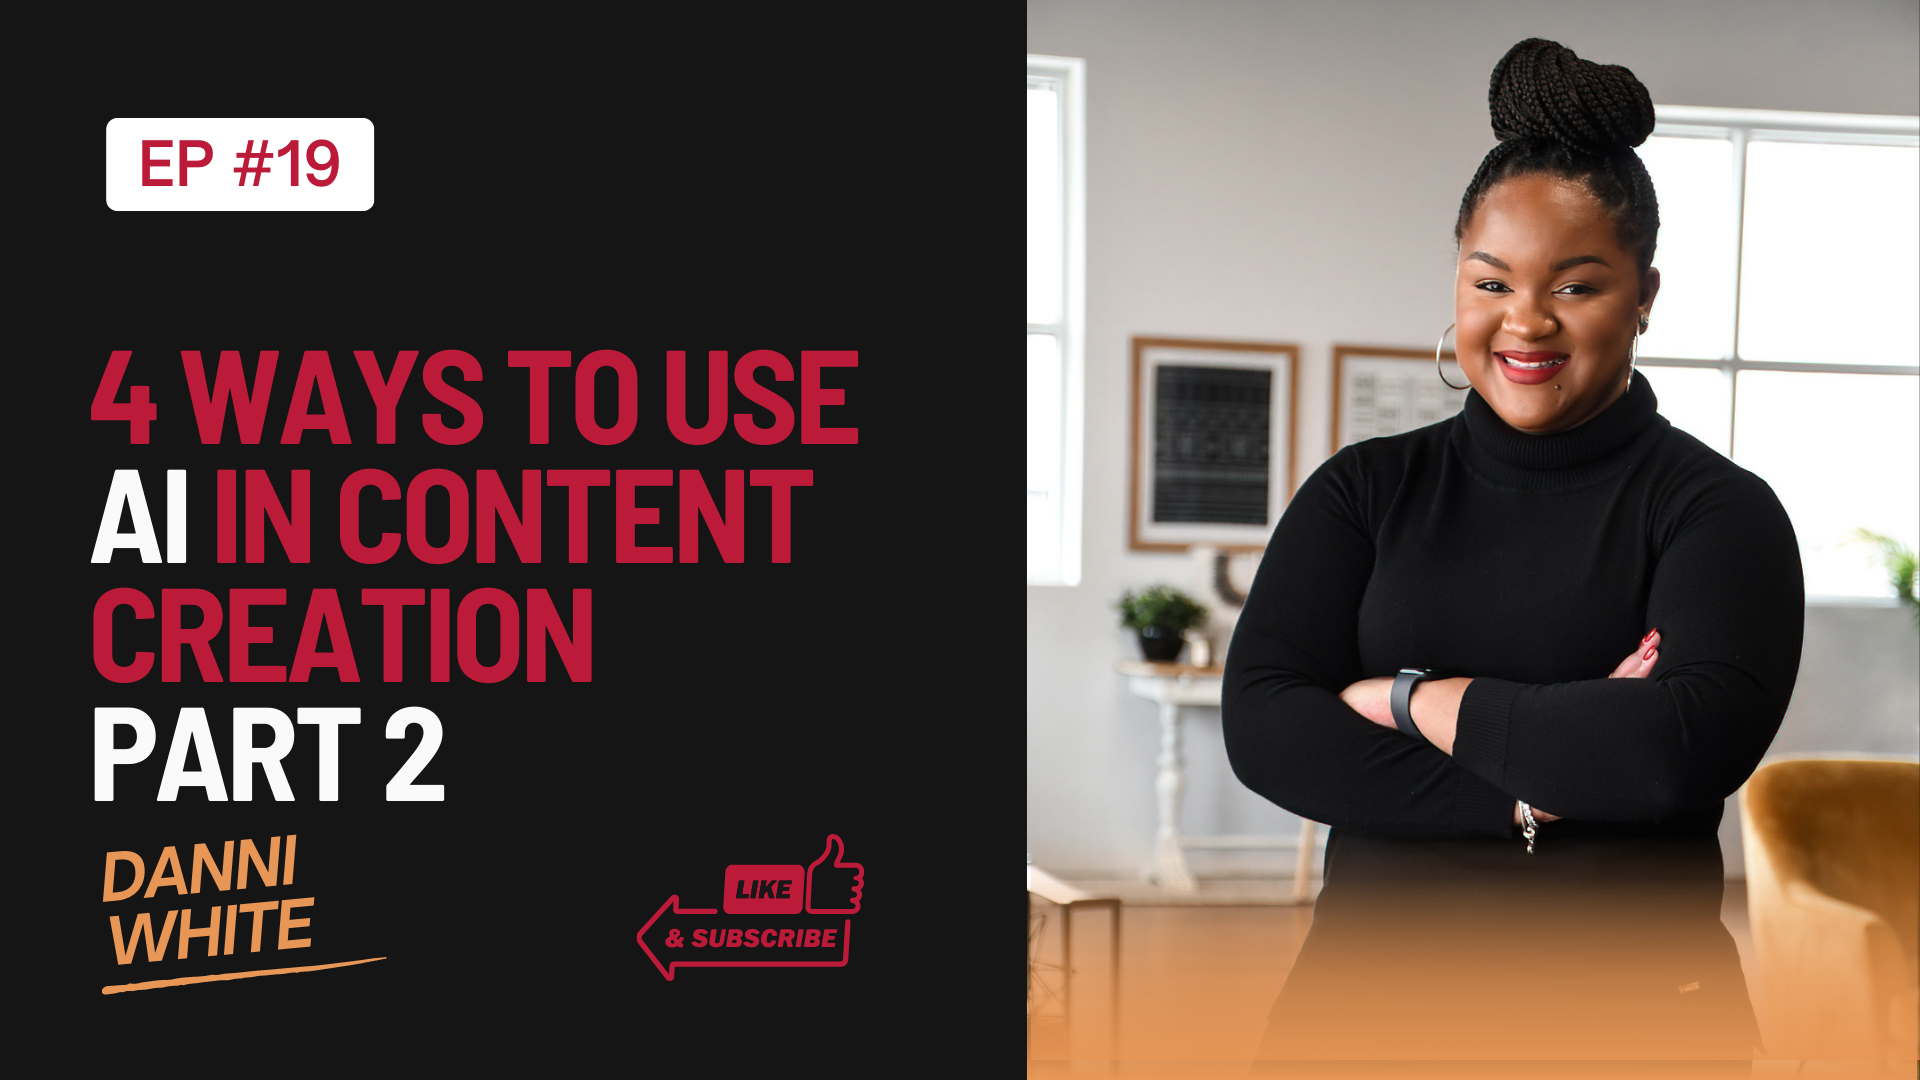 Episode 19: 4 Ways to Use AI in Content Creation [Part 2]